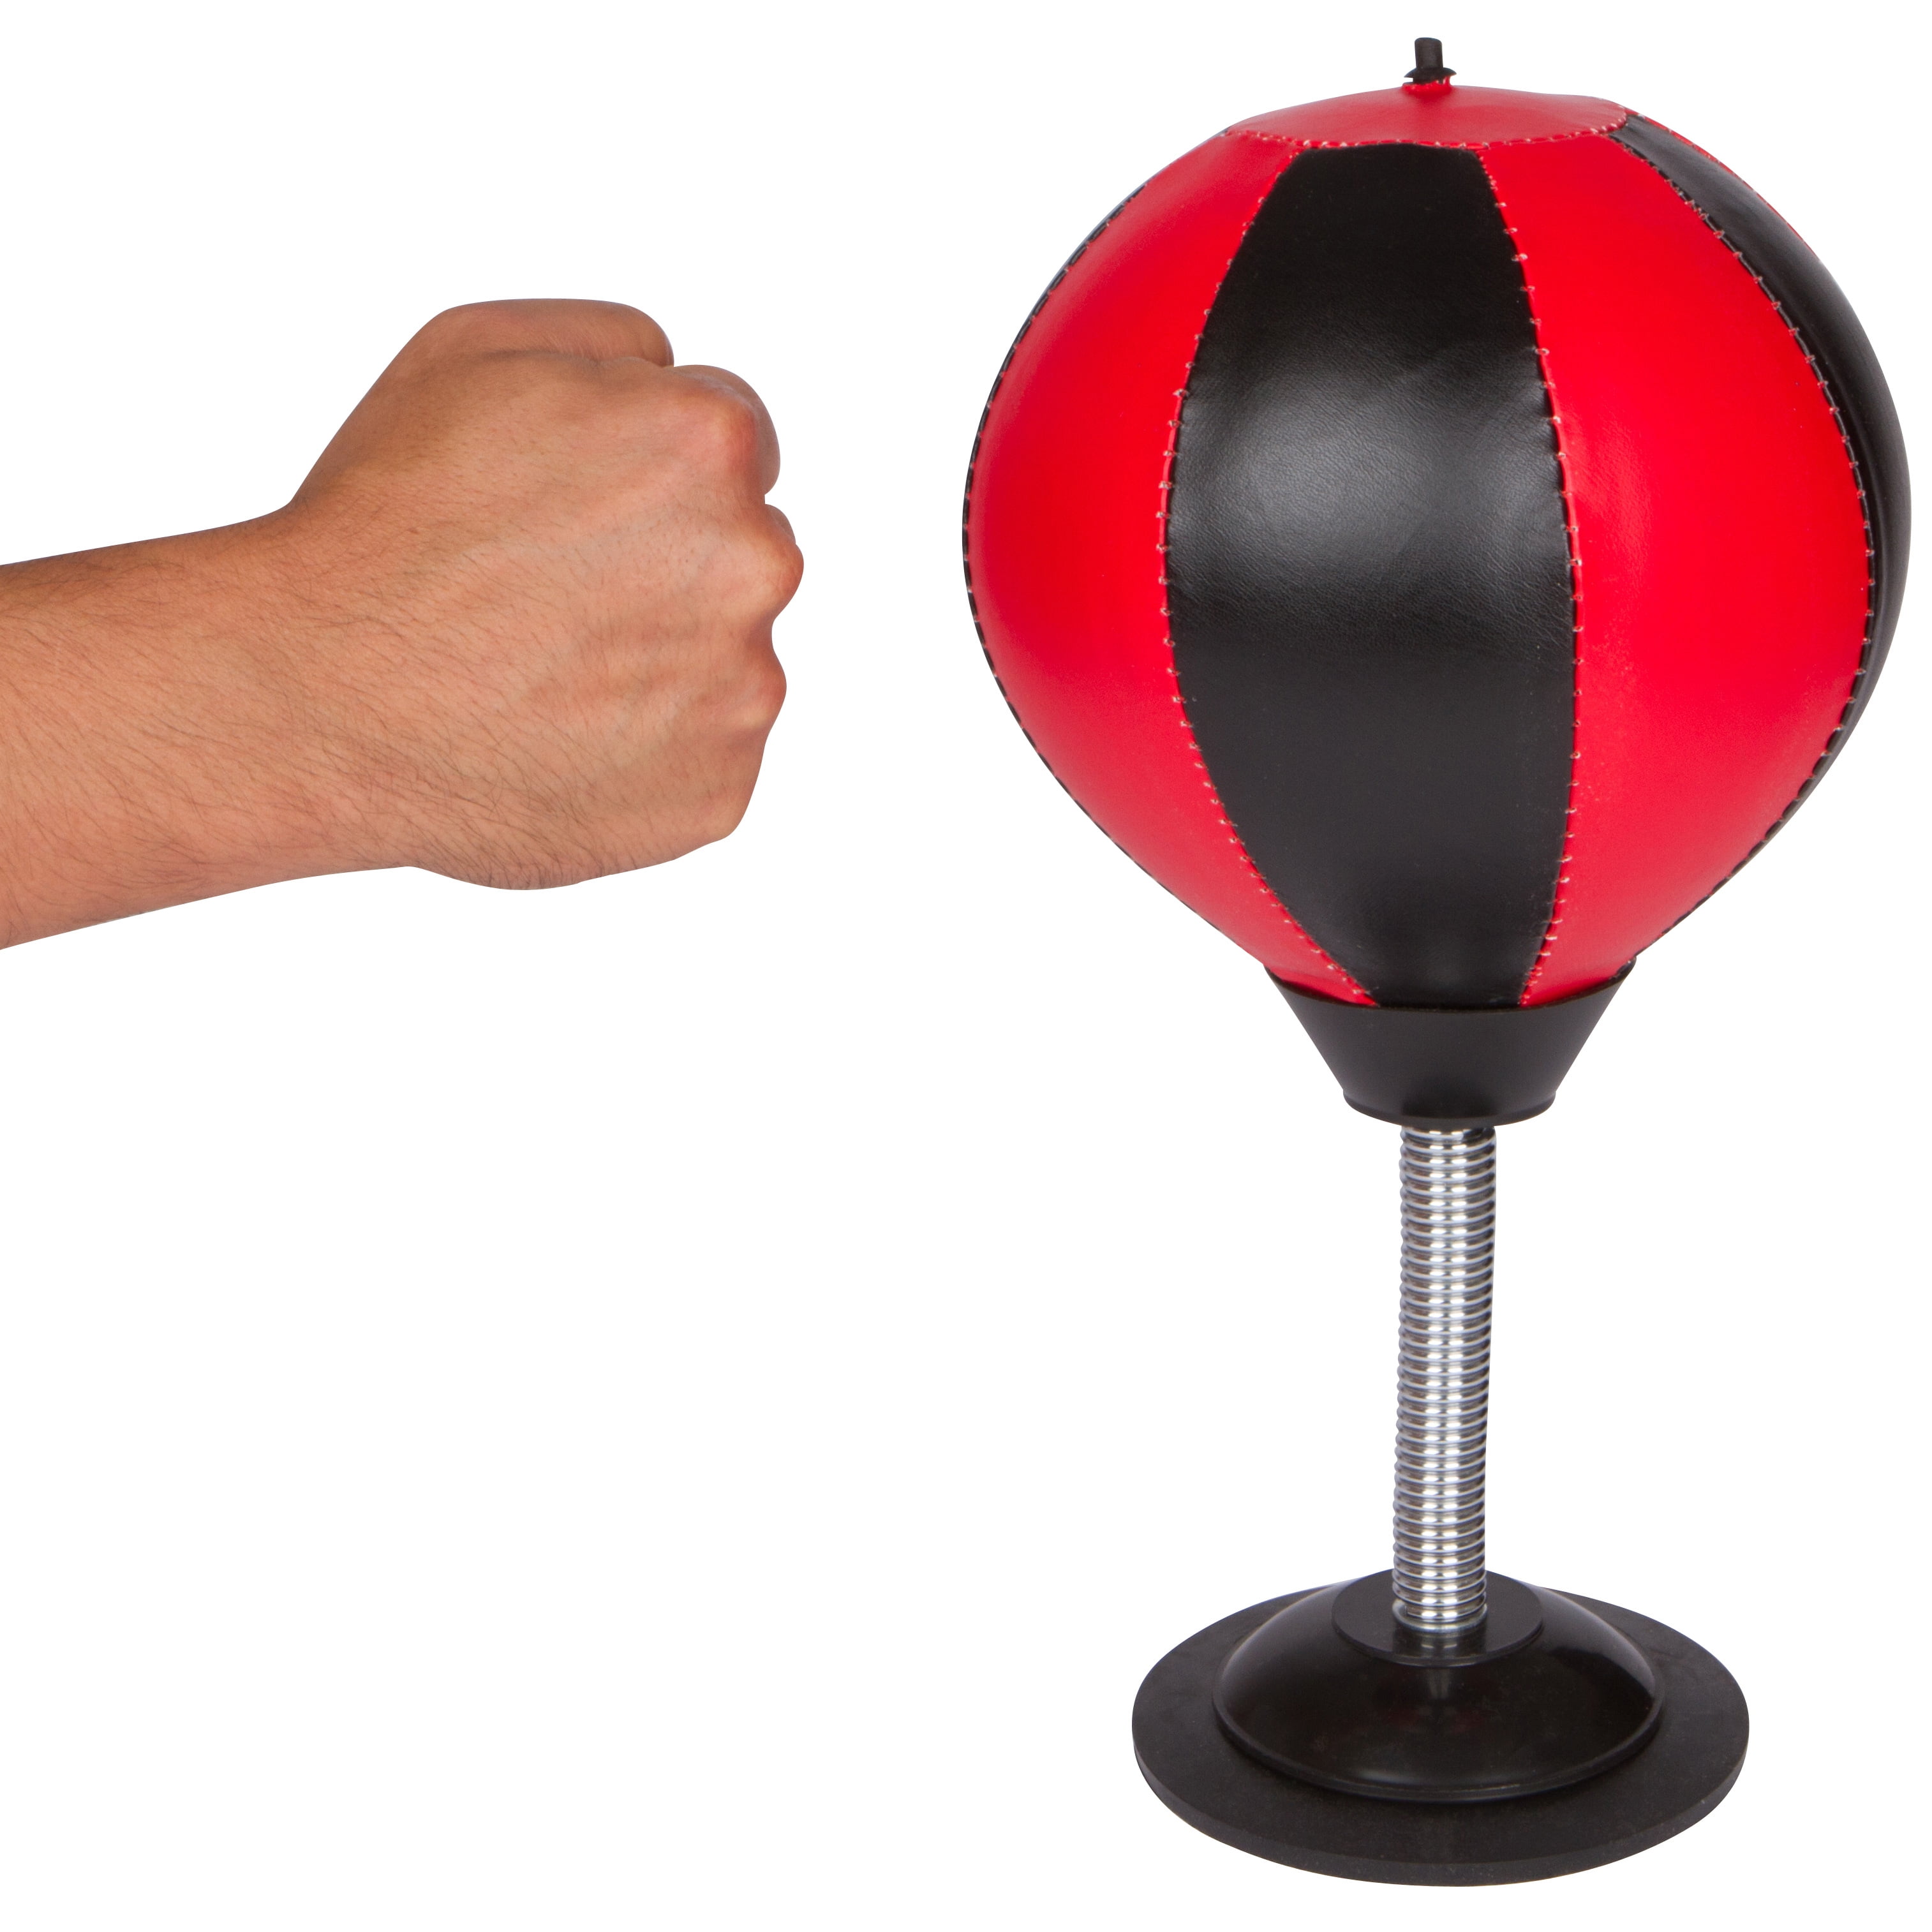 2020 Desktop Punching Ball Stress Reliever Buster Desk Speed Punch Bag with Pump 